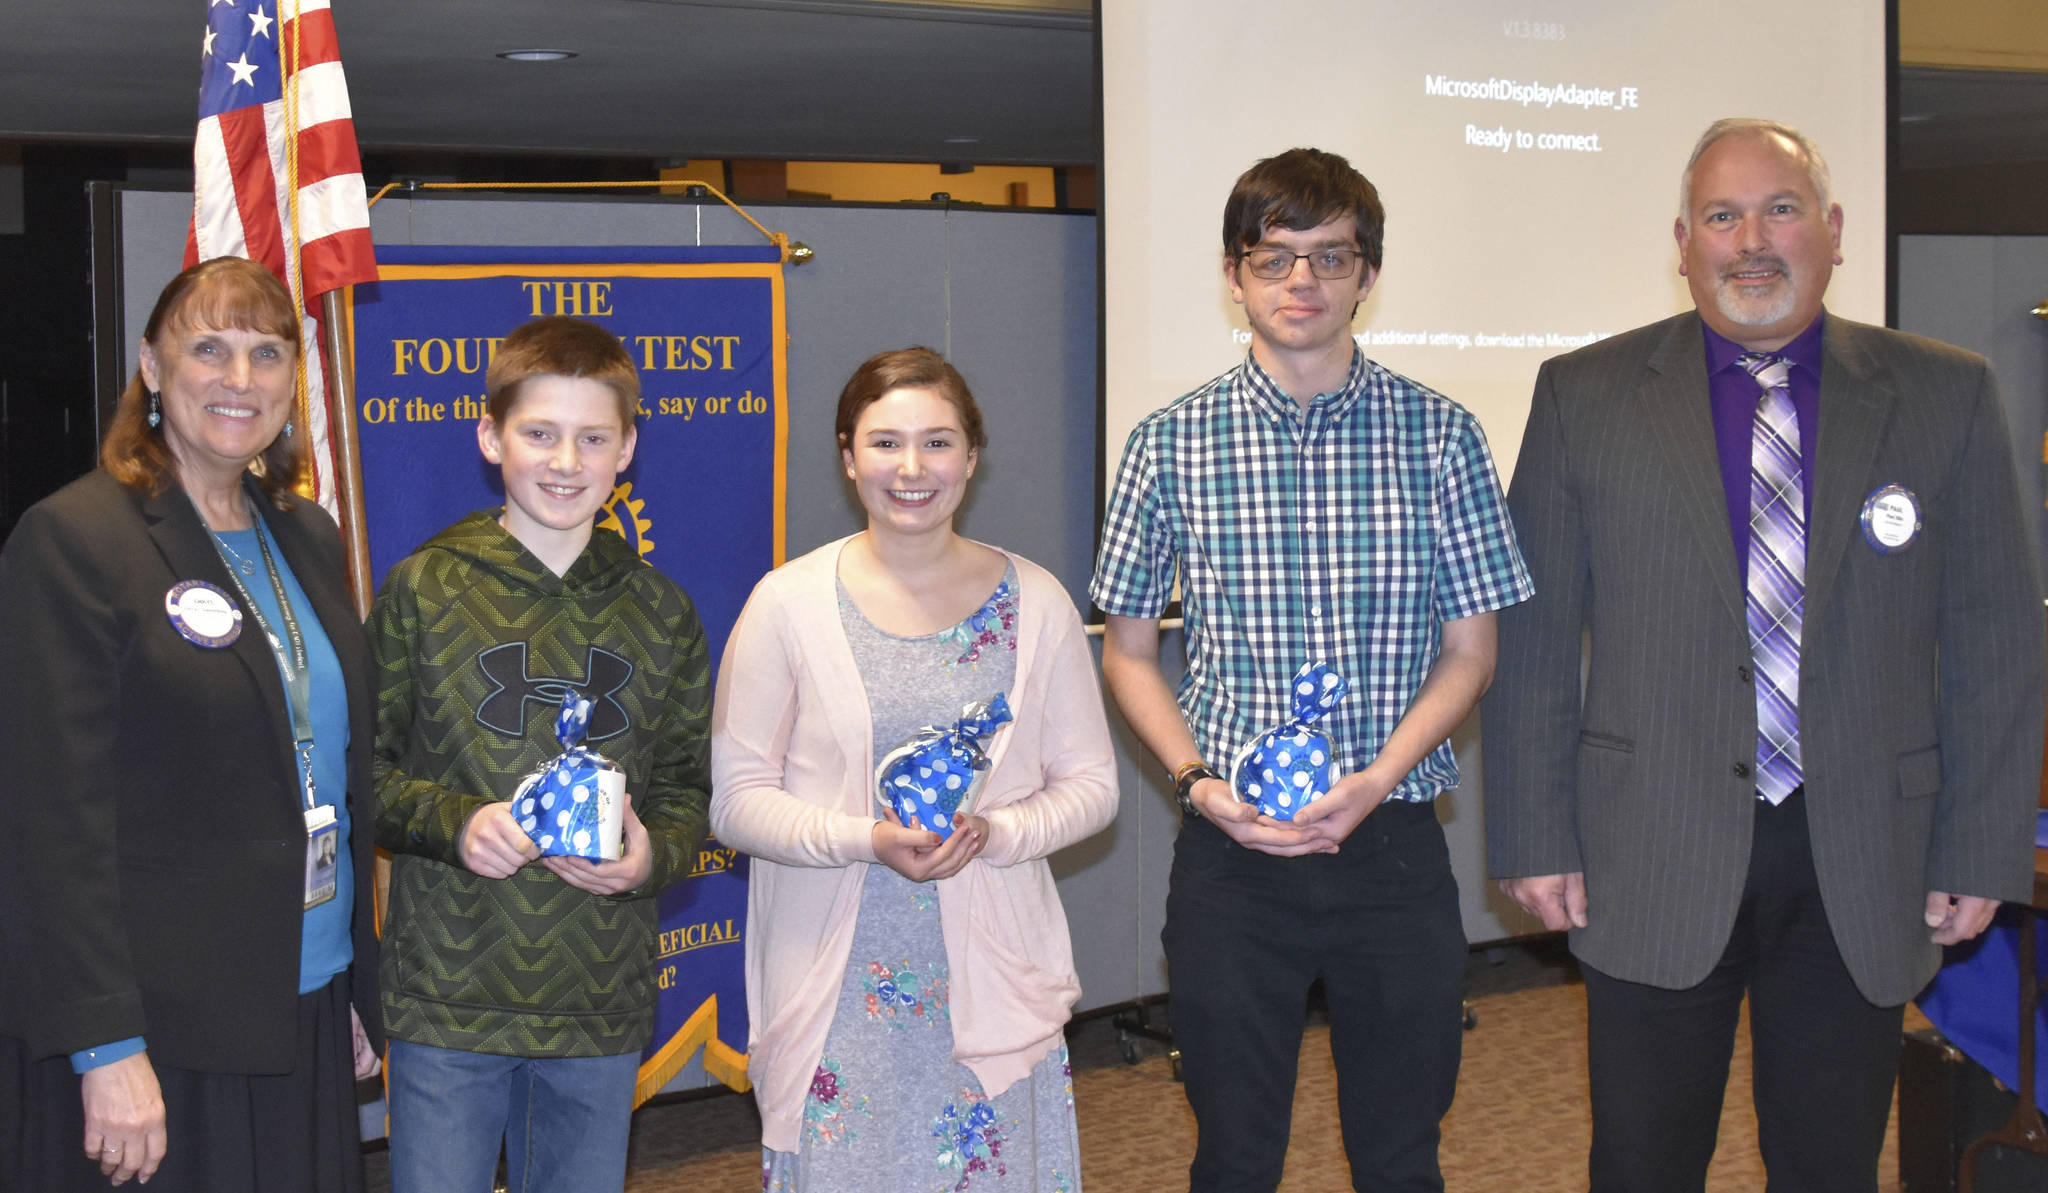 Arlington Rotary Club honored three outstanding students recently for making a difference in their school. From left, Arlington Public Schools Superintendent Chrys Sweeting; Kaden Martinsen, Post Middle School; Trinity Bowles, Haller Middle School; Aaron Holocke, Weston High School; and Rotary President Paul Ellis.